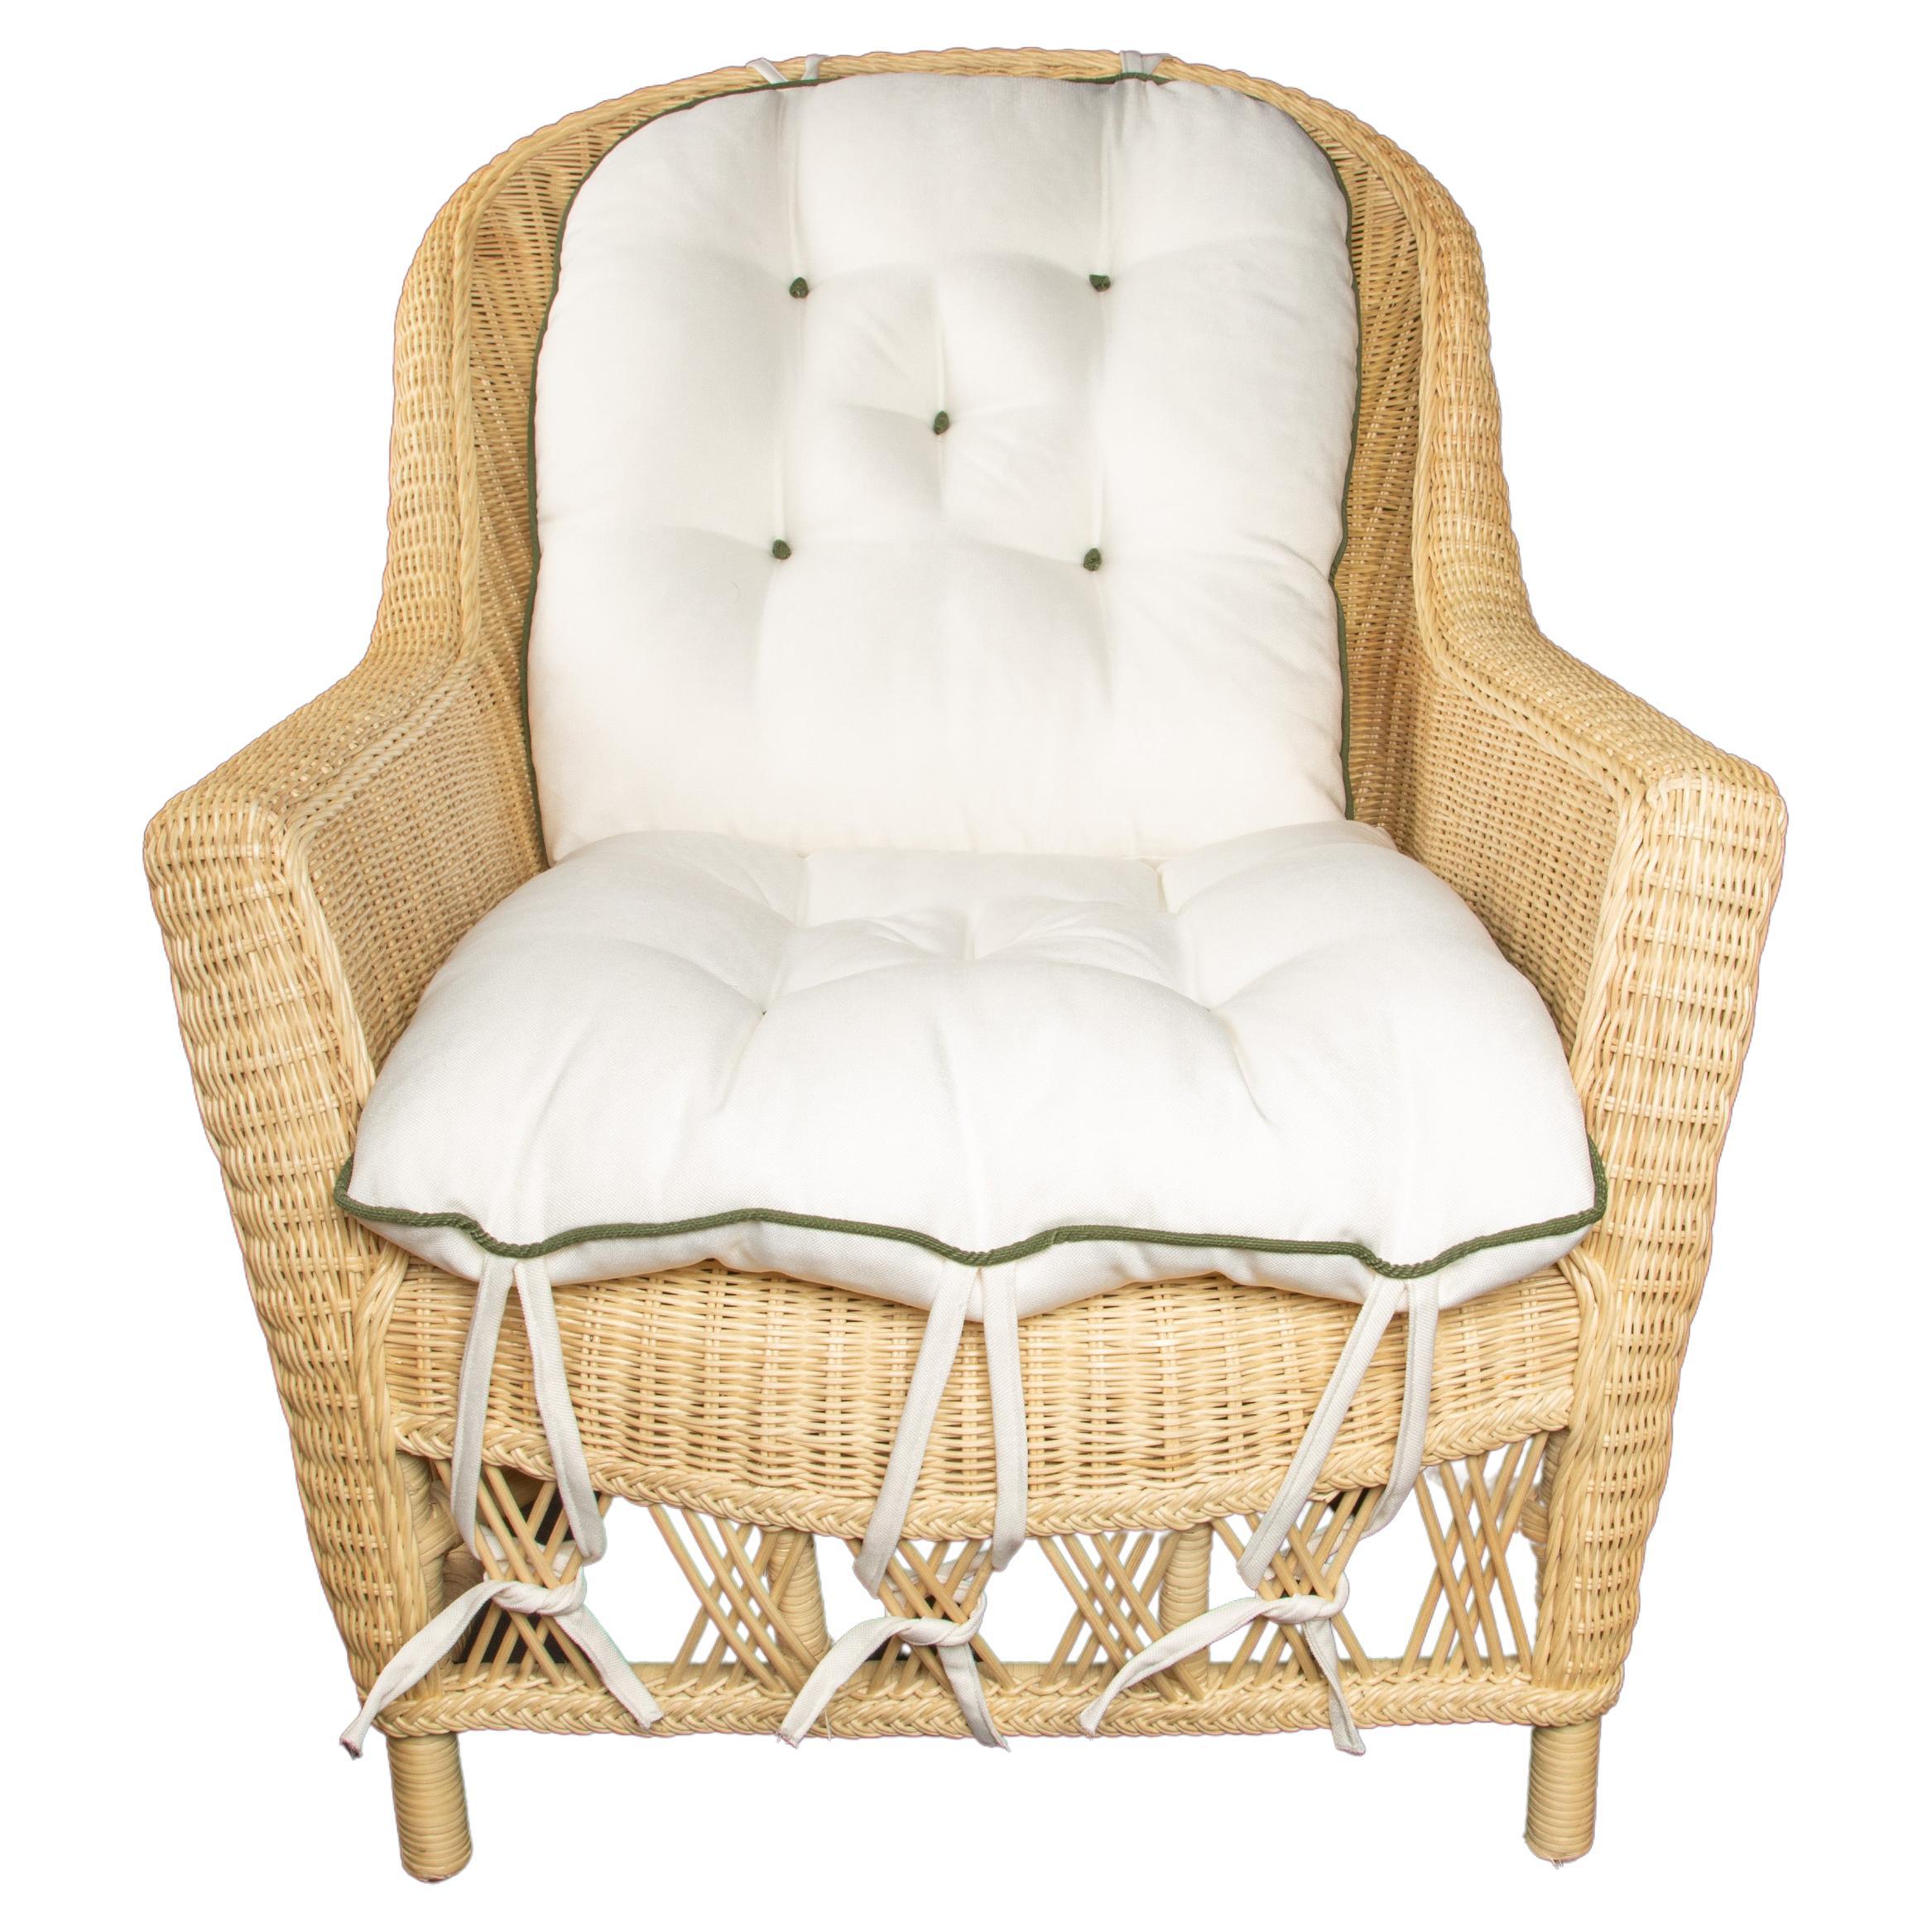 The Dana Wicker Scoop Chair:

Introducing Creel and Gow's exclusive wicker and rattan collection, designed by Marco Scarani. We're proud to offer our customers these revised vintage rattan furniture pieces that have been skillfully crafted in